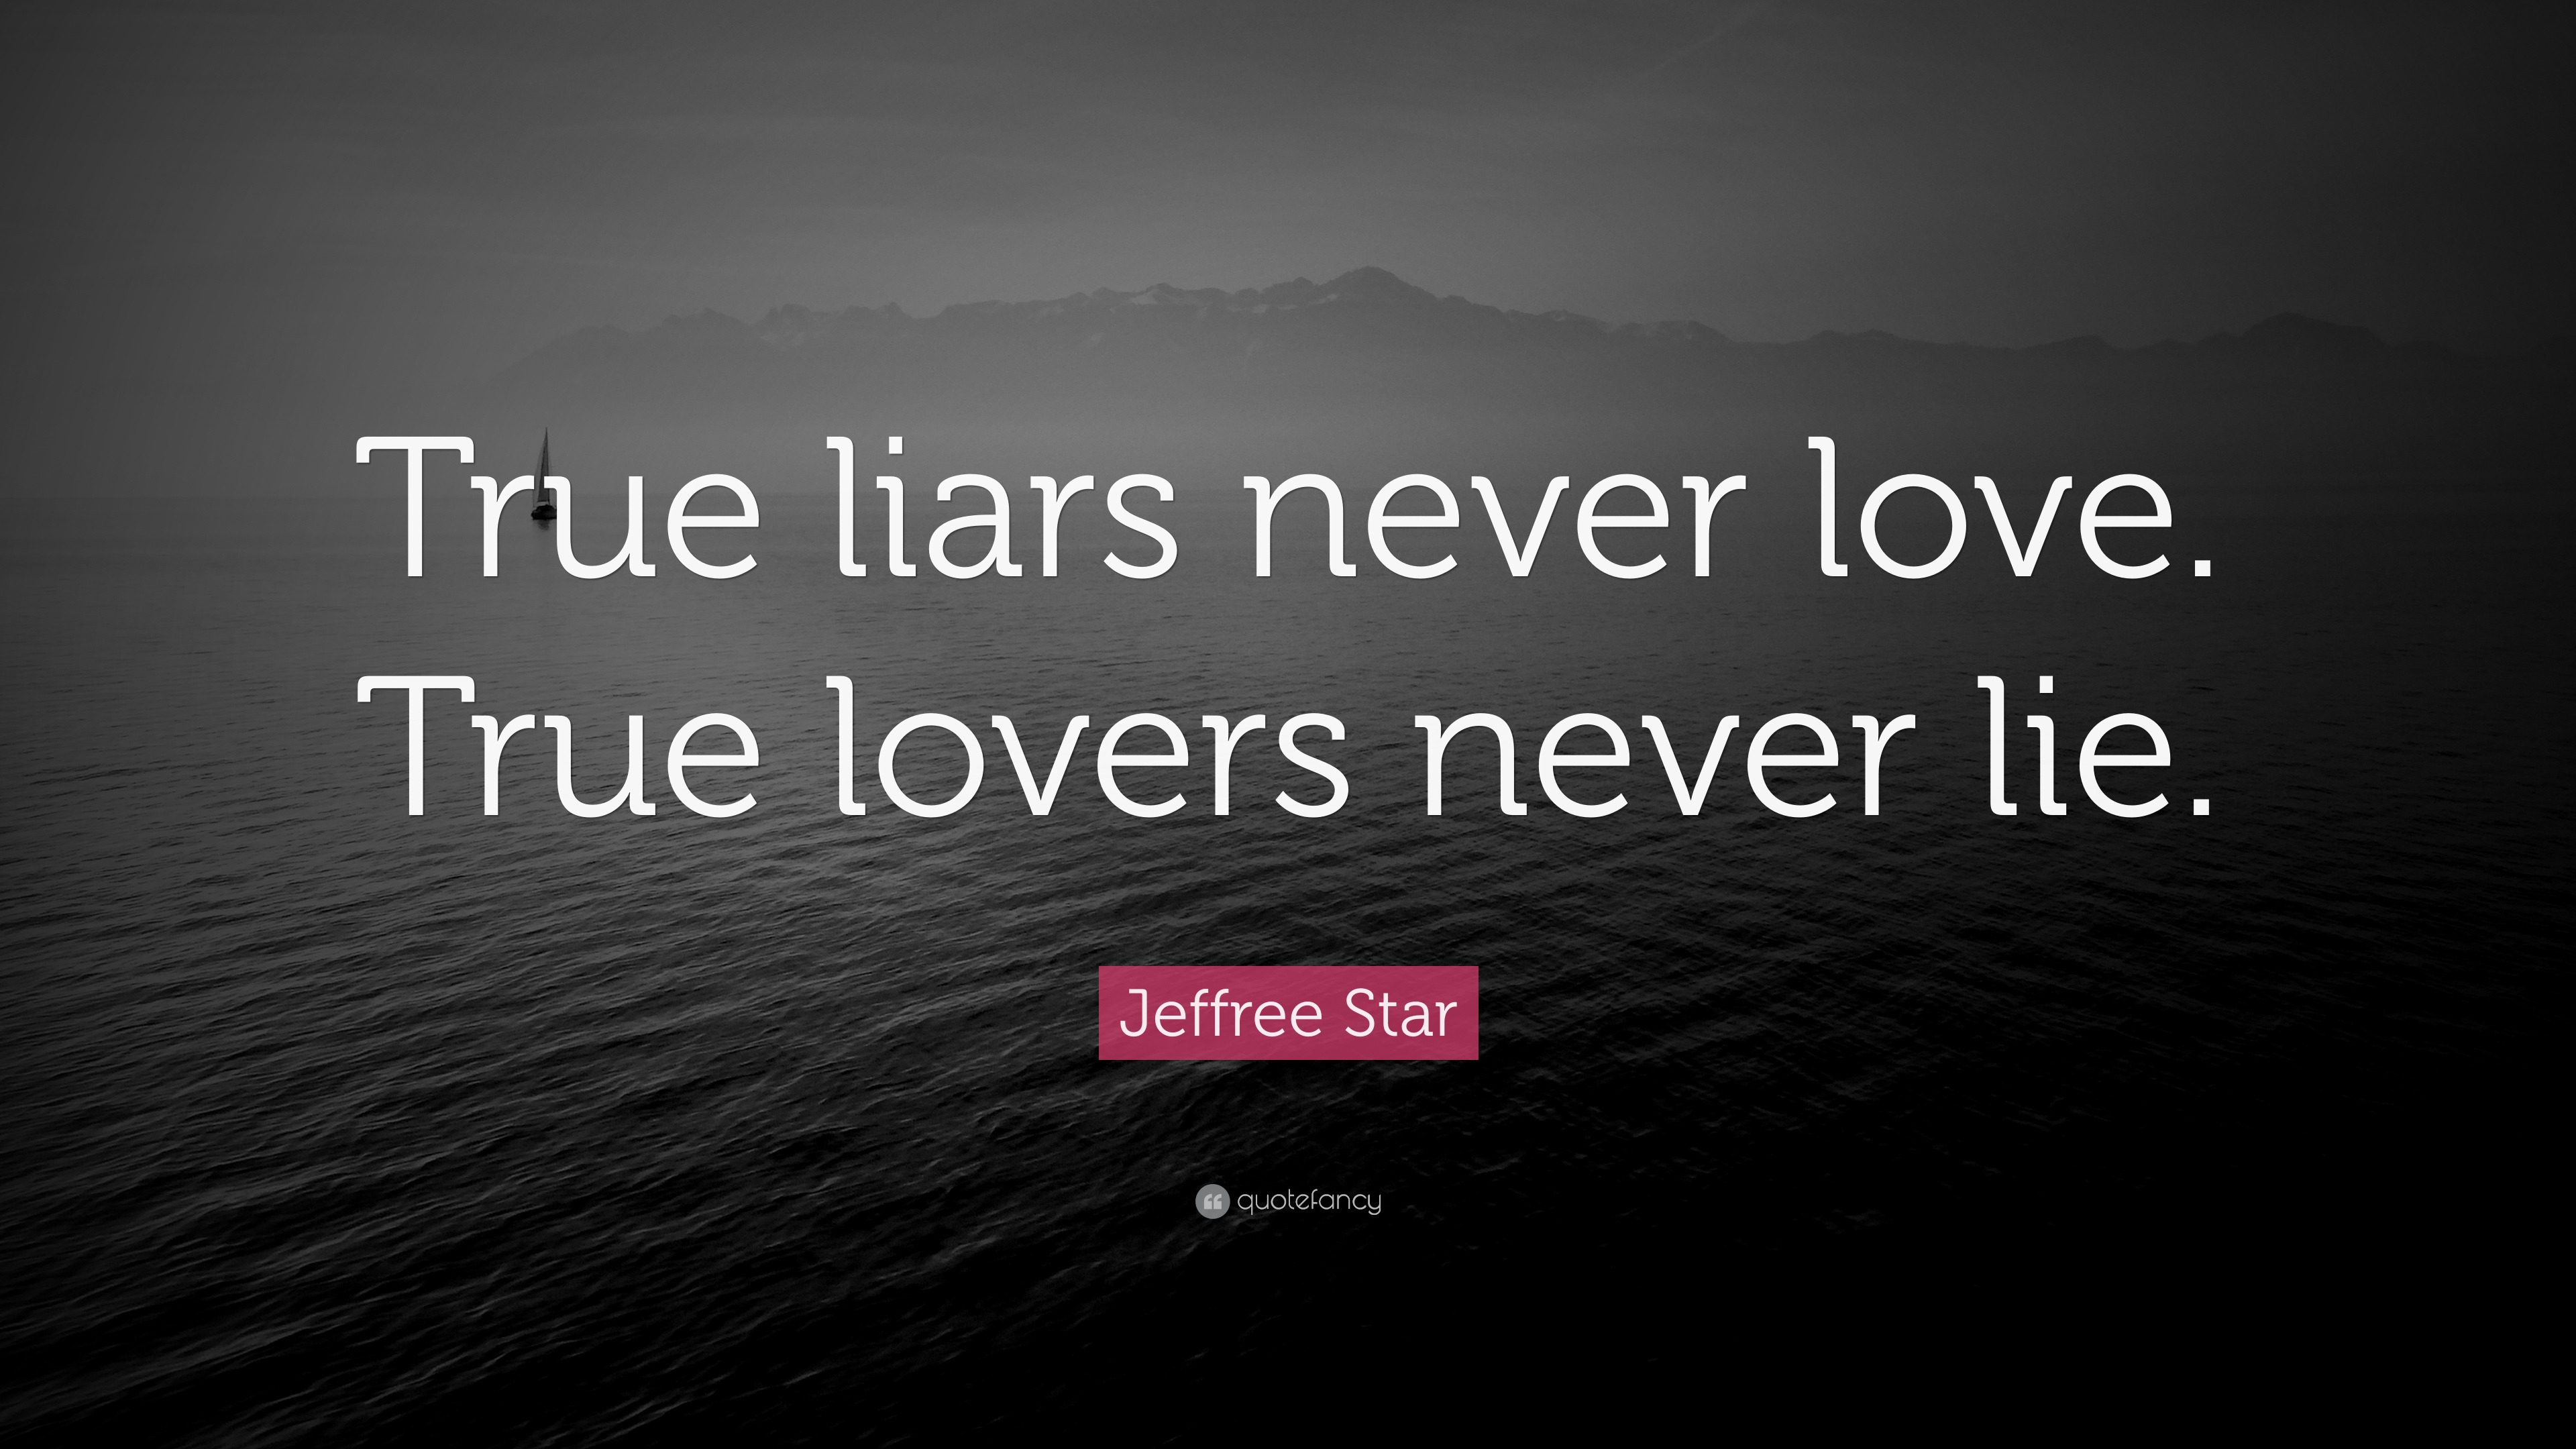 quotes about lies in love